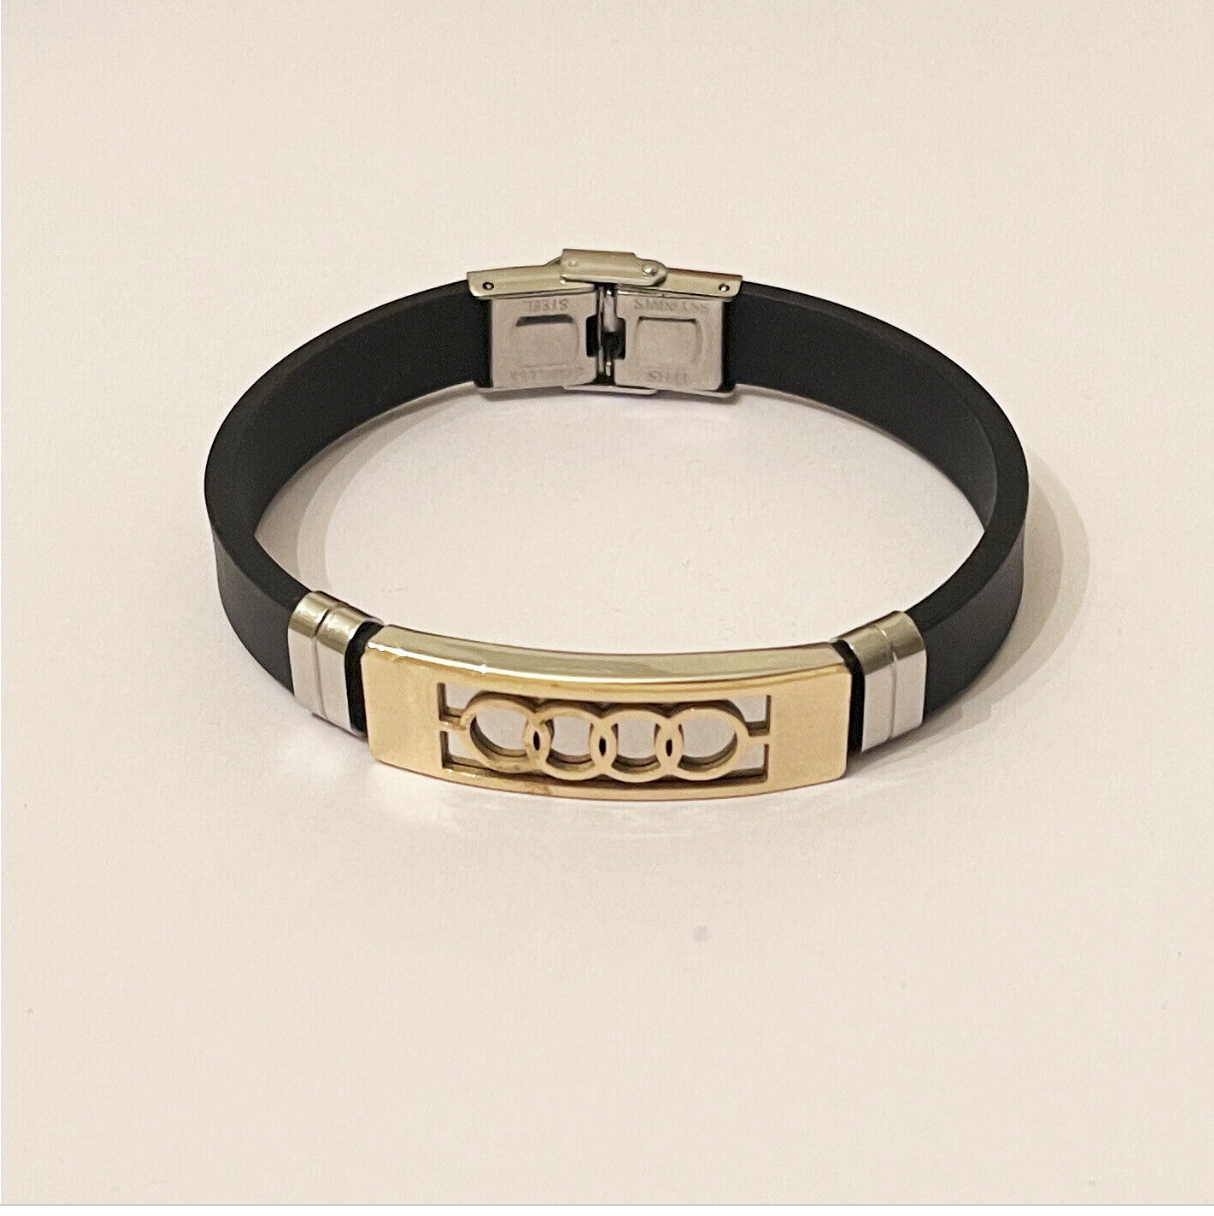 Men’s business stainless steel bracelet with black PU leather